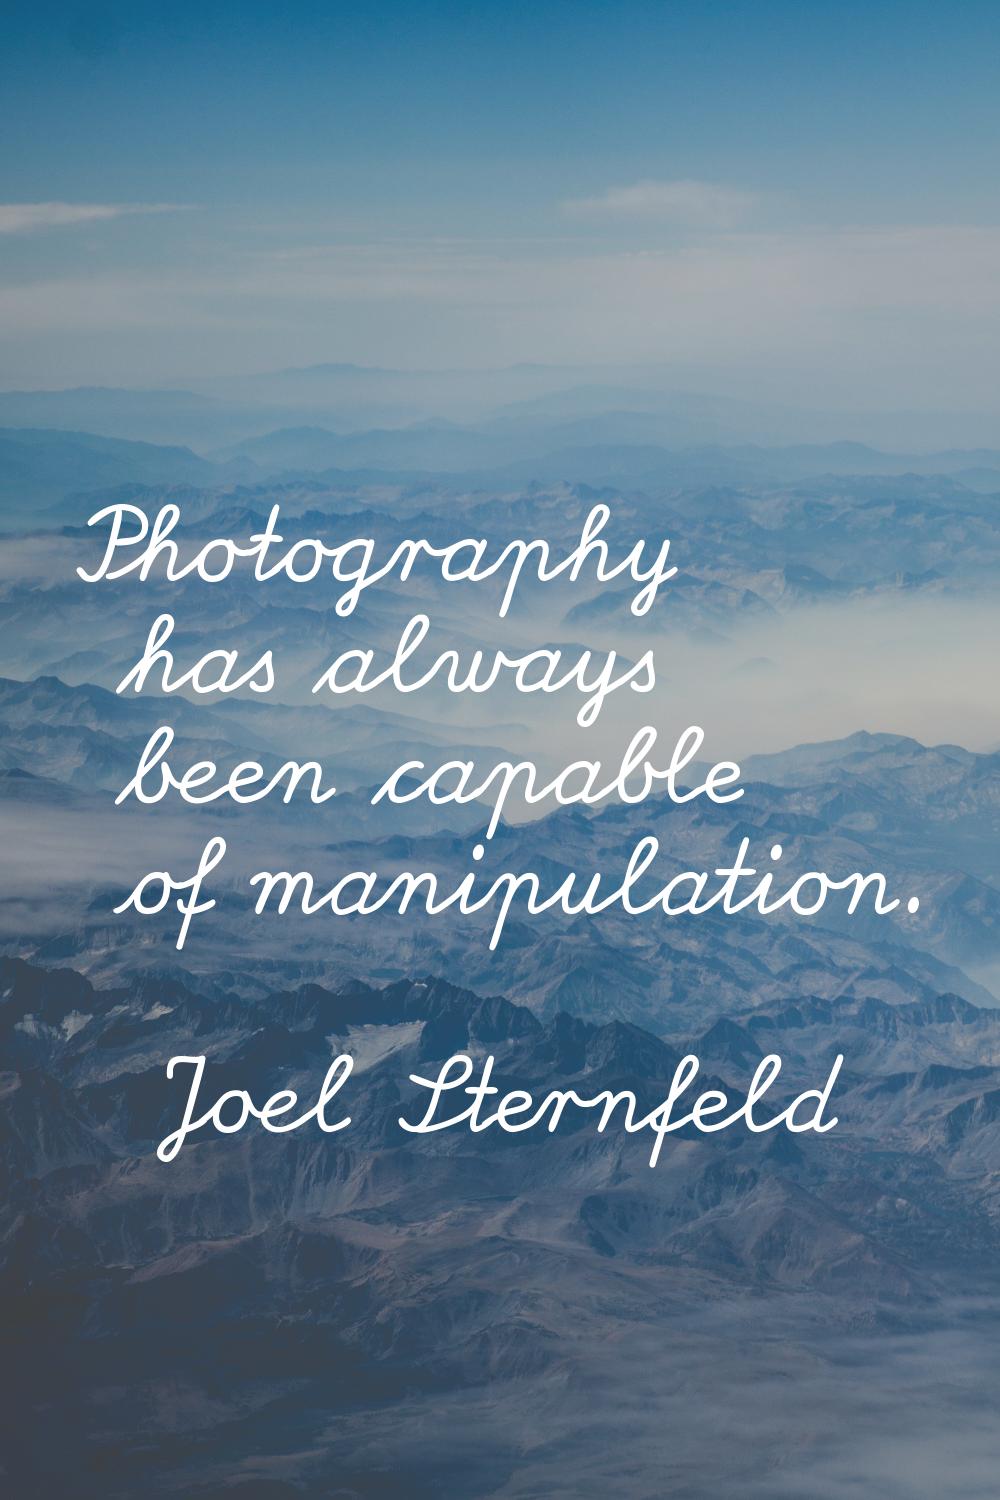 Photography has always been capable of manipulation.